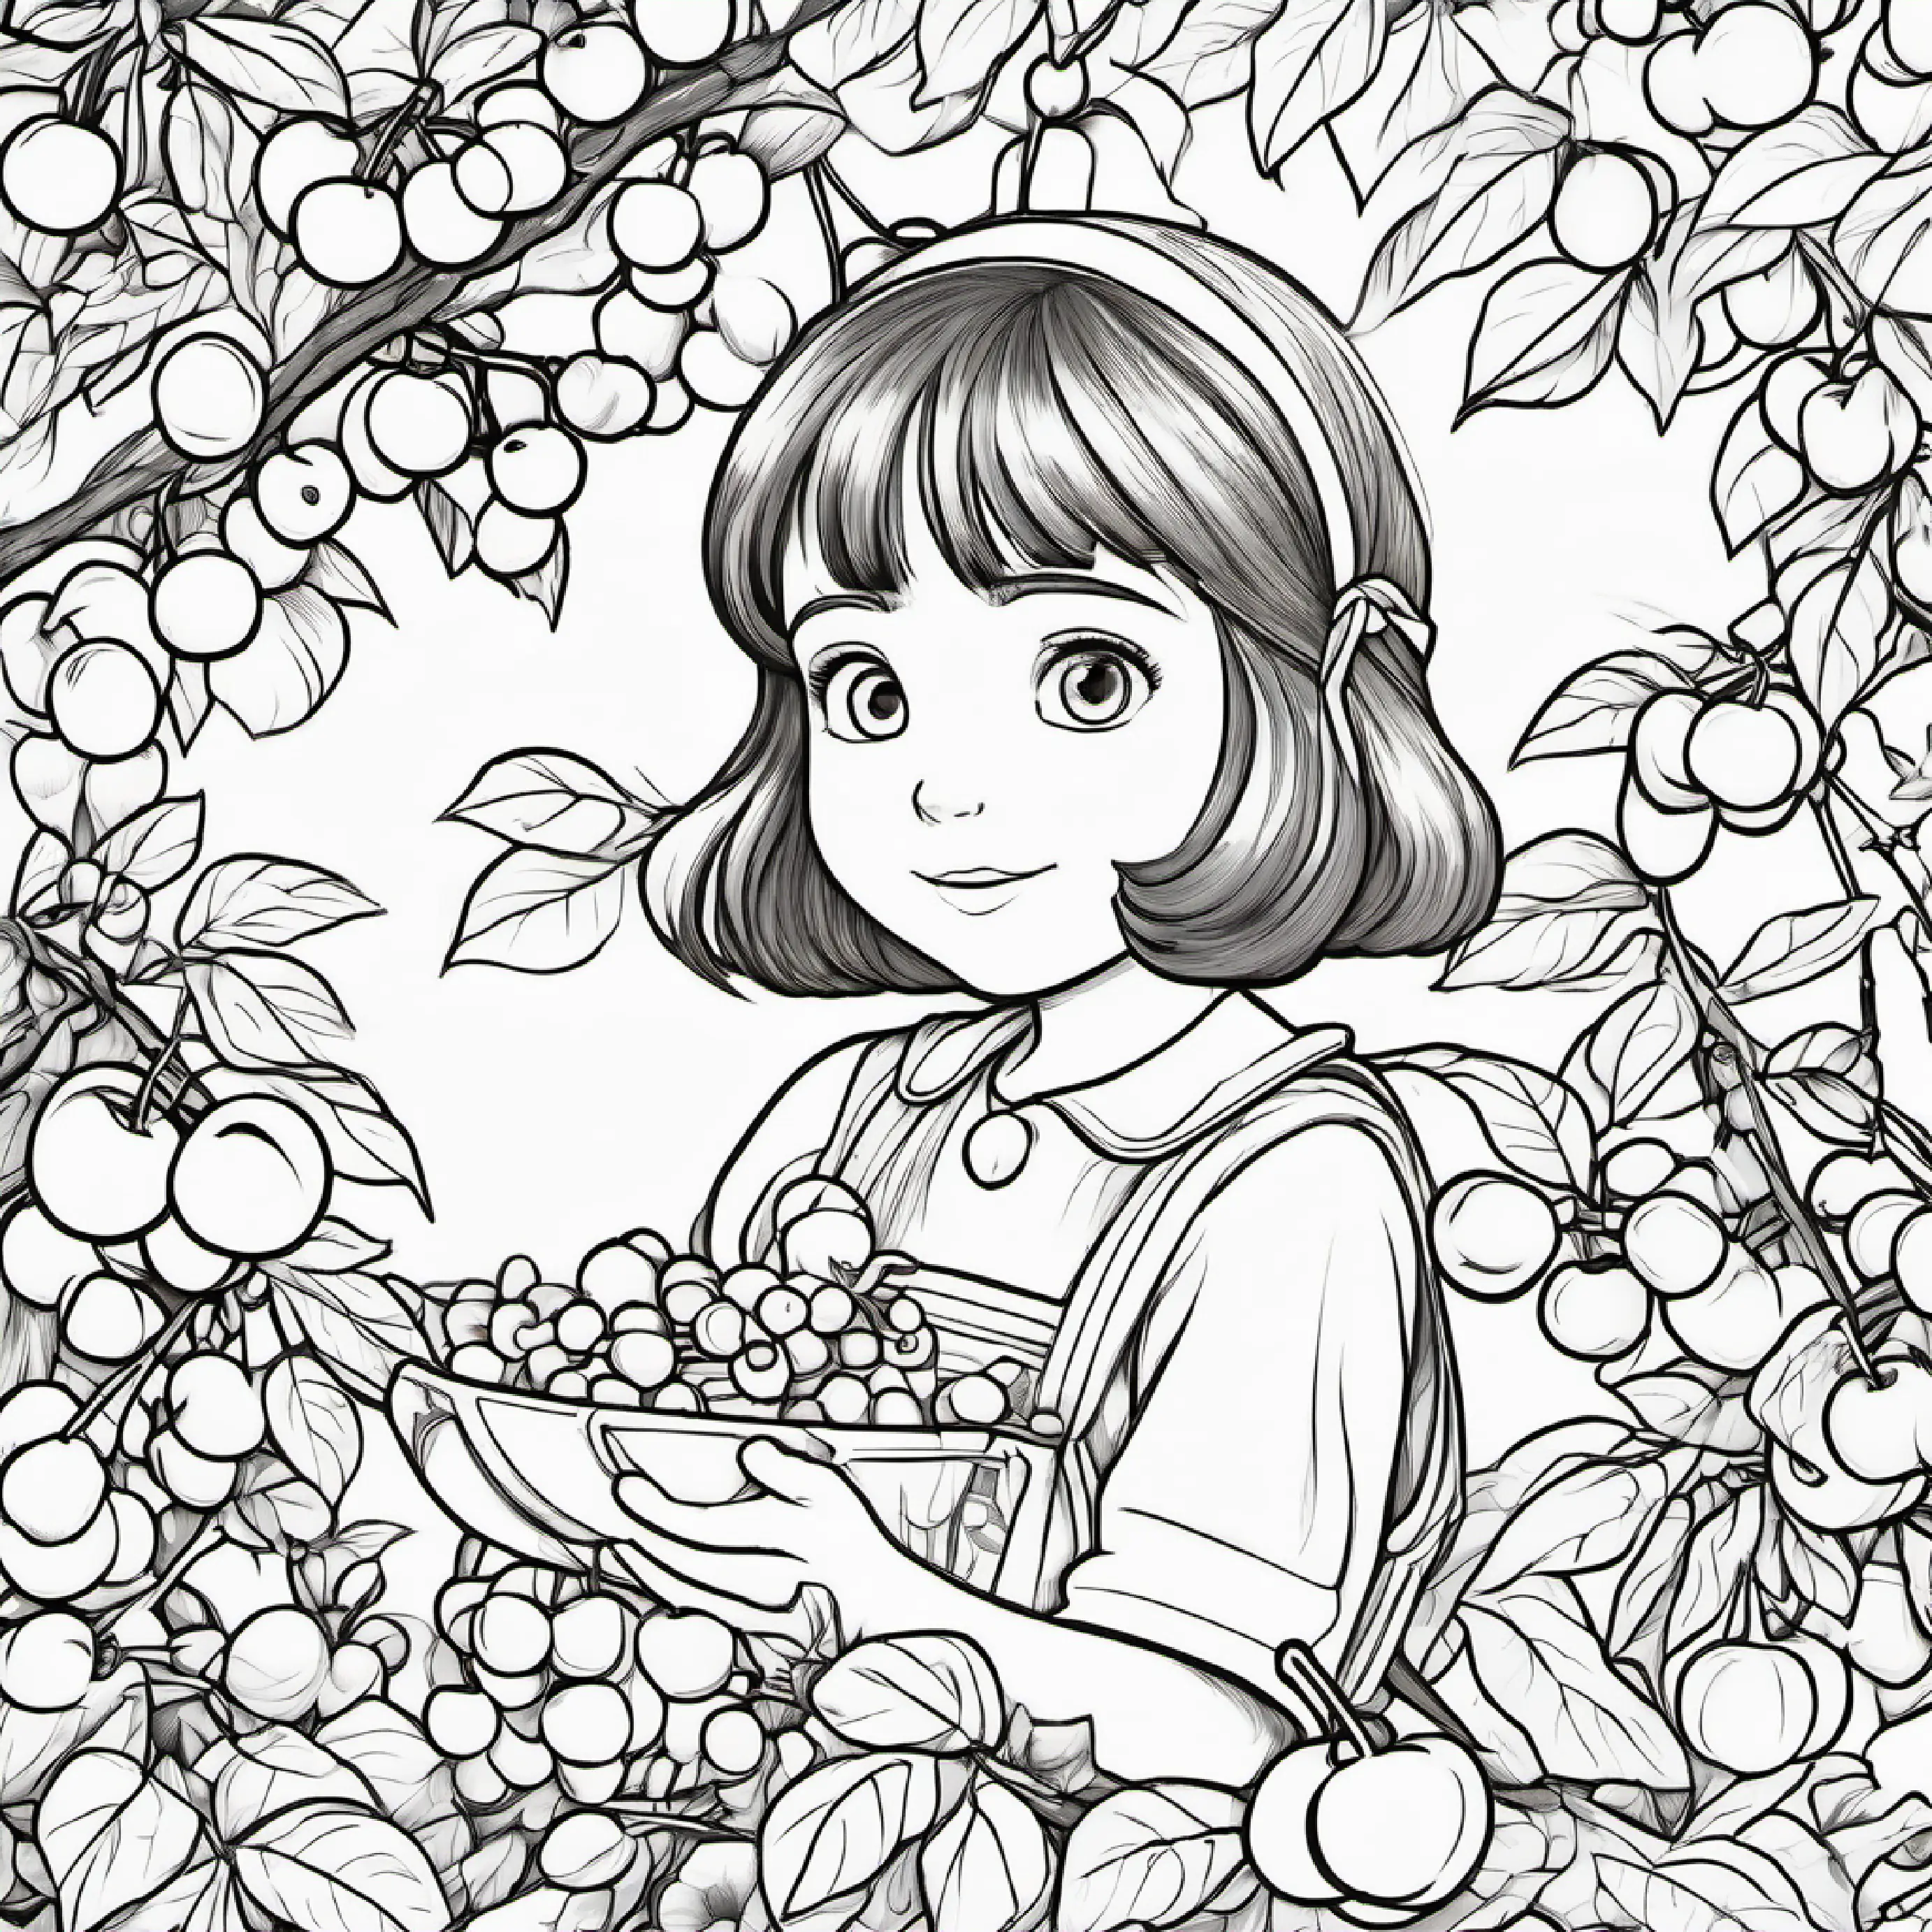 Young girl with brown hair and bright blue eyes solves Lush cherry bush with red fruit and a playful demeanor's cherry puzzle.